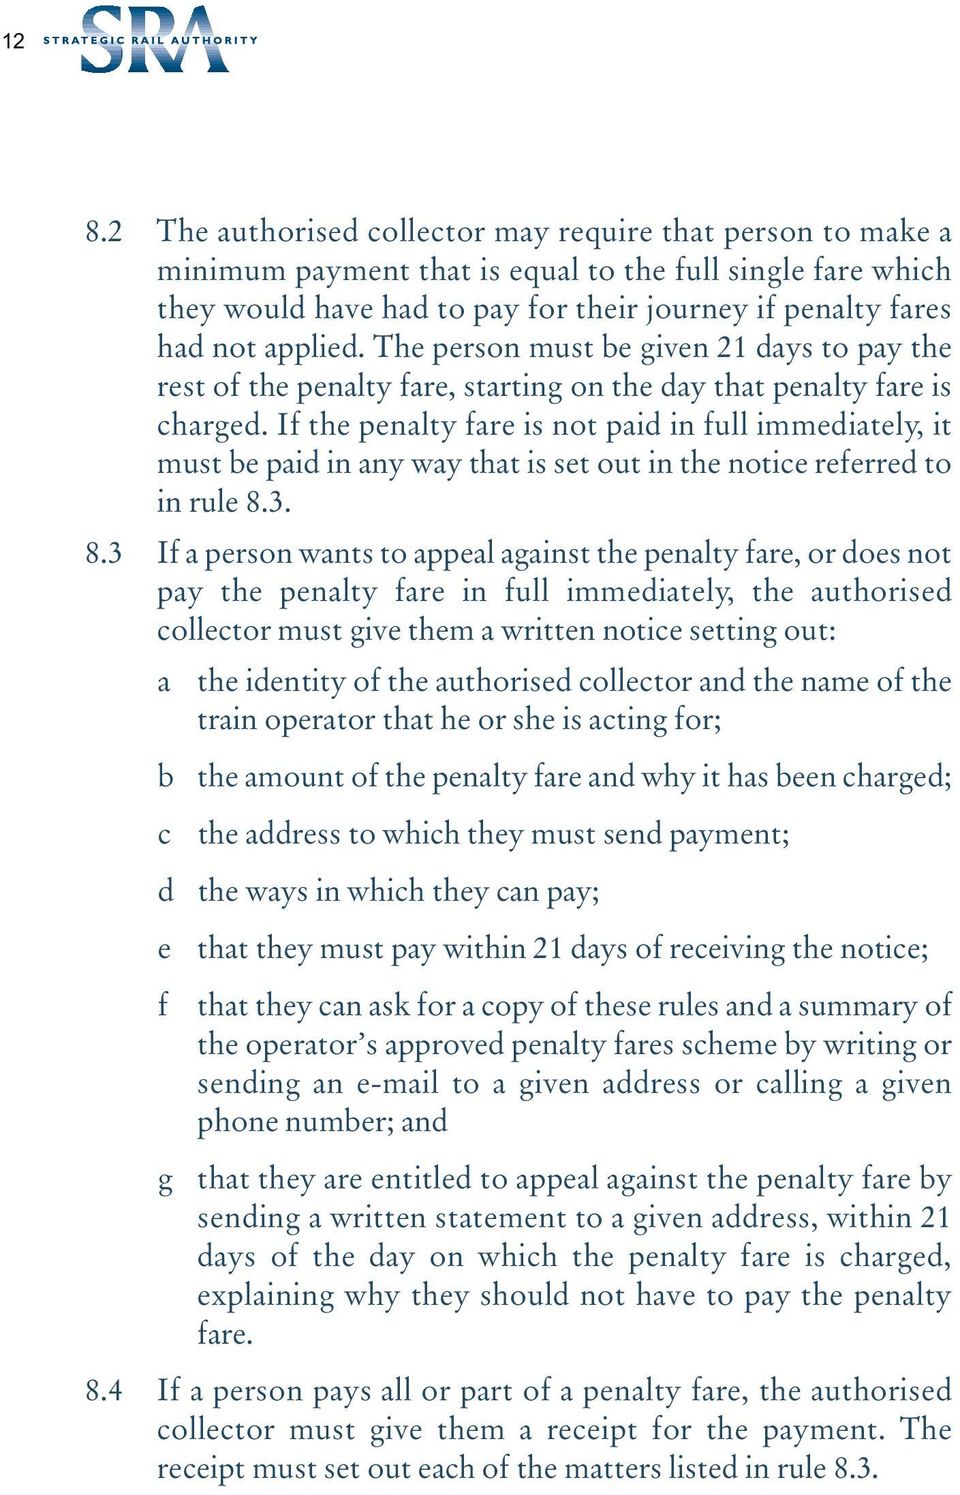 If the penalty fare is not paid in full immediately, it must be paid in any way that is set out in the notice referred to in rule 8.